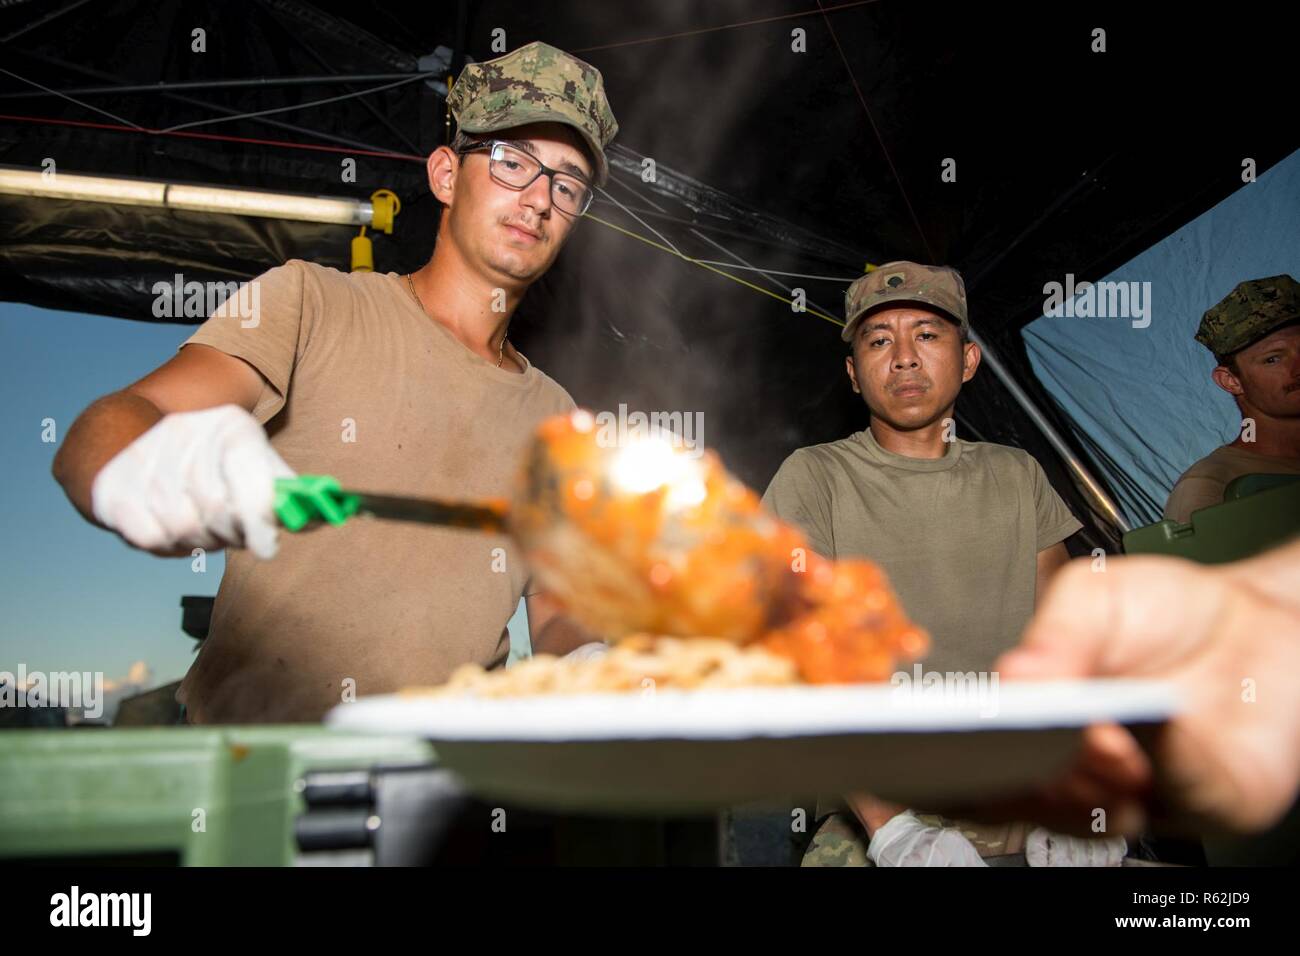 TINIAN, Commonwealth of the Northern Mariana Islands (Nov. 18, 2018) Construction Mechanic Construction Apprentice James Joyce, assigned to Naval Mobile Construction Battalion (NMCB) 1, Detachment Guam, from Pittsburgh, and Army Spc. Angelito Angala, assigned to the 303rd Maneuver Enhancement Brigade, from Honolulu, serve dinner to Sailors assigned to NMCB 1 during recovery efforts. Service members from Joint Region Marianas and U.S. Indo-Pacific Command are providing Department of Defense support to the Commonwealth of the Northern Mariana Islands' civil and local officials as part of the Fed Stock Photo